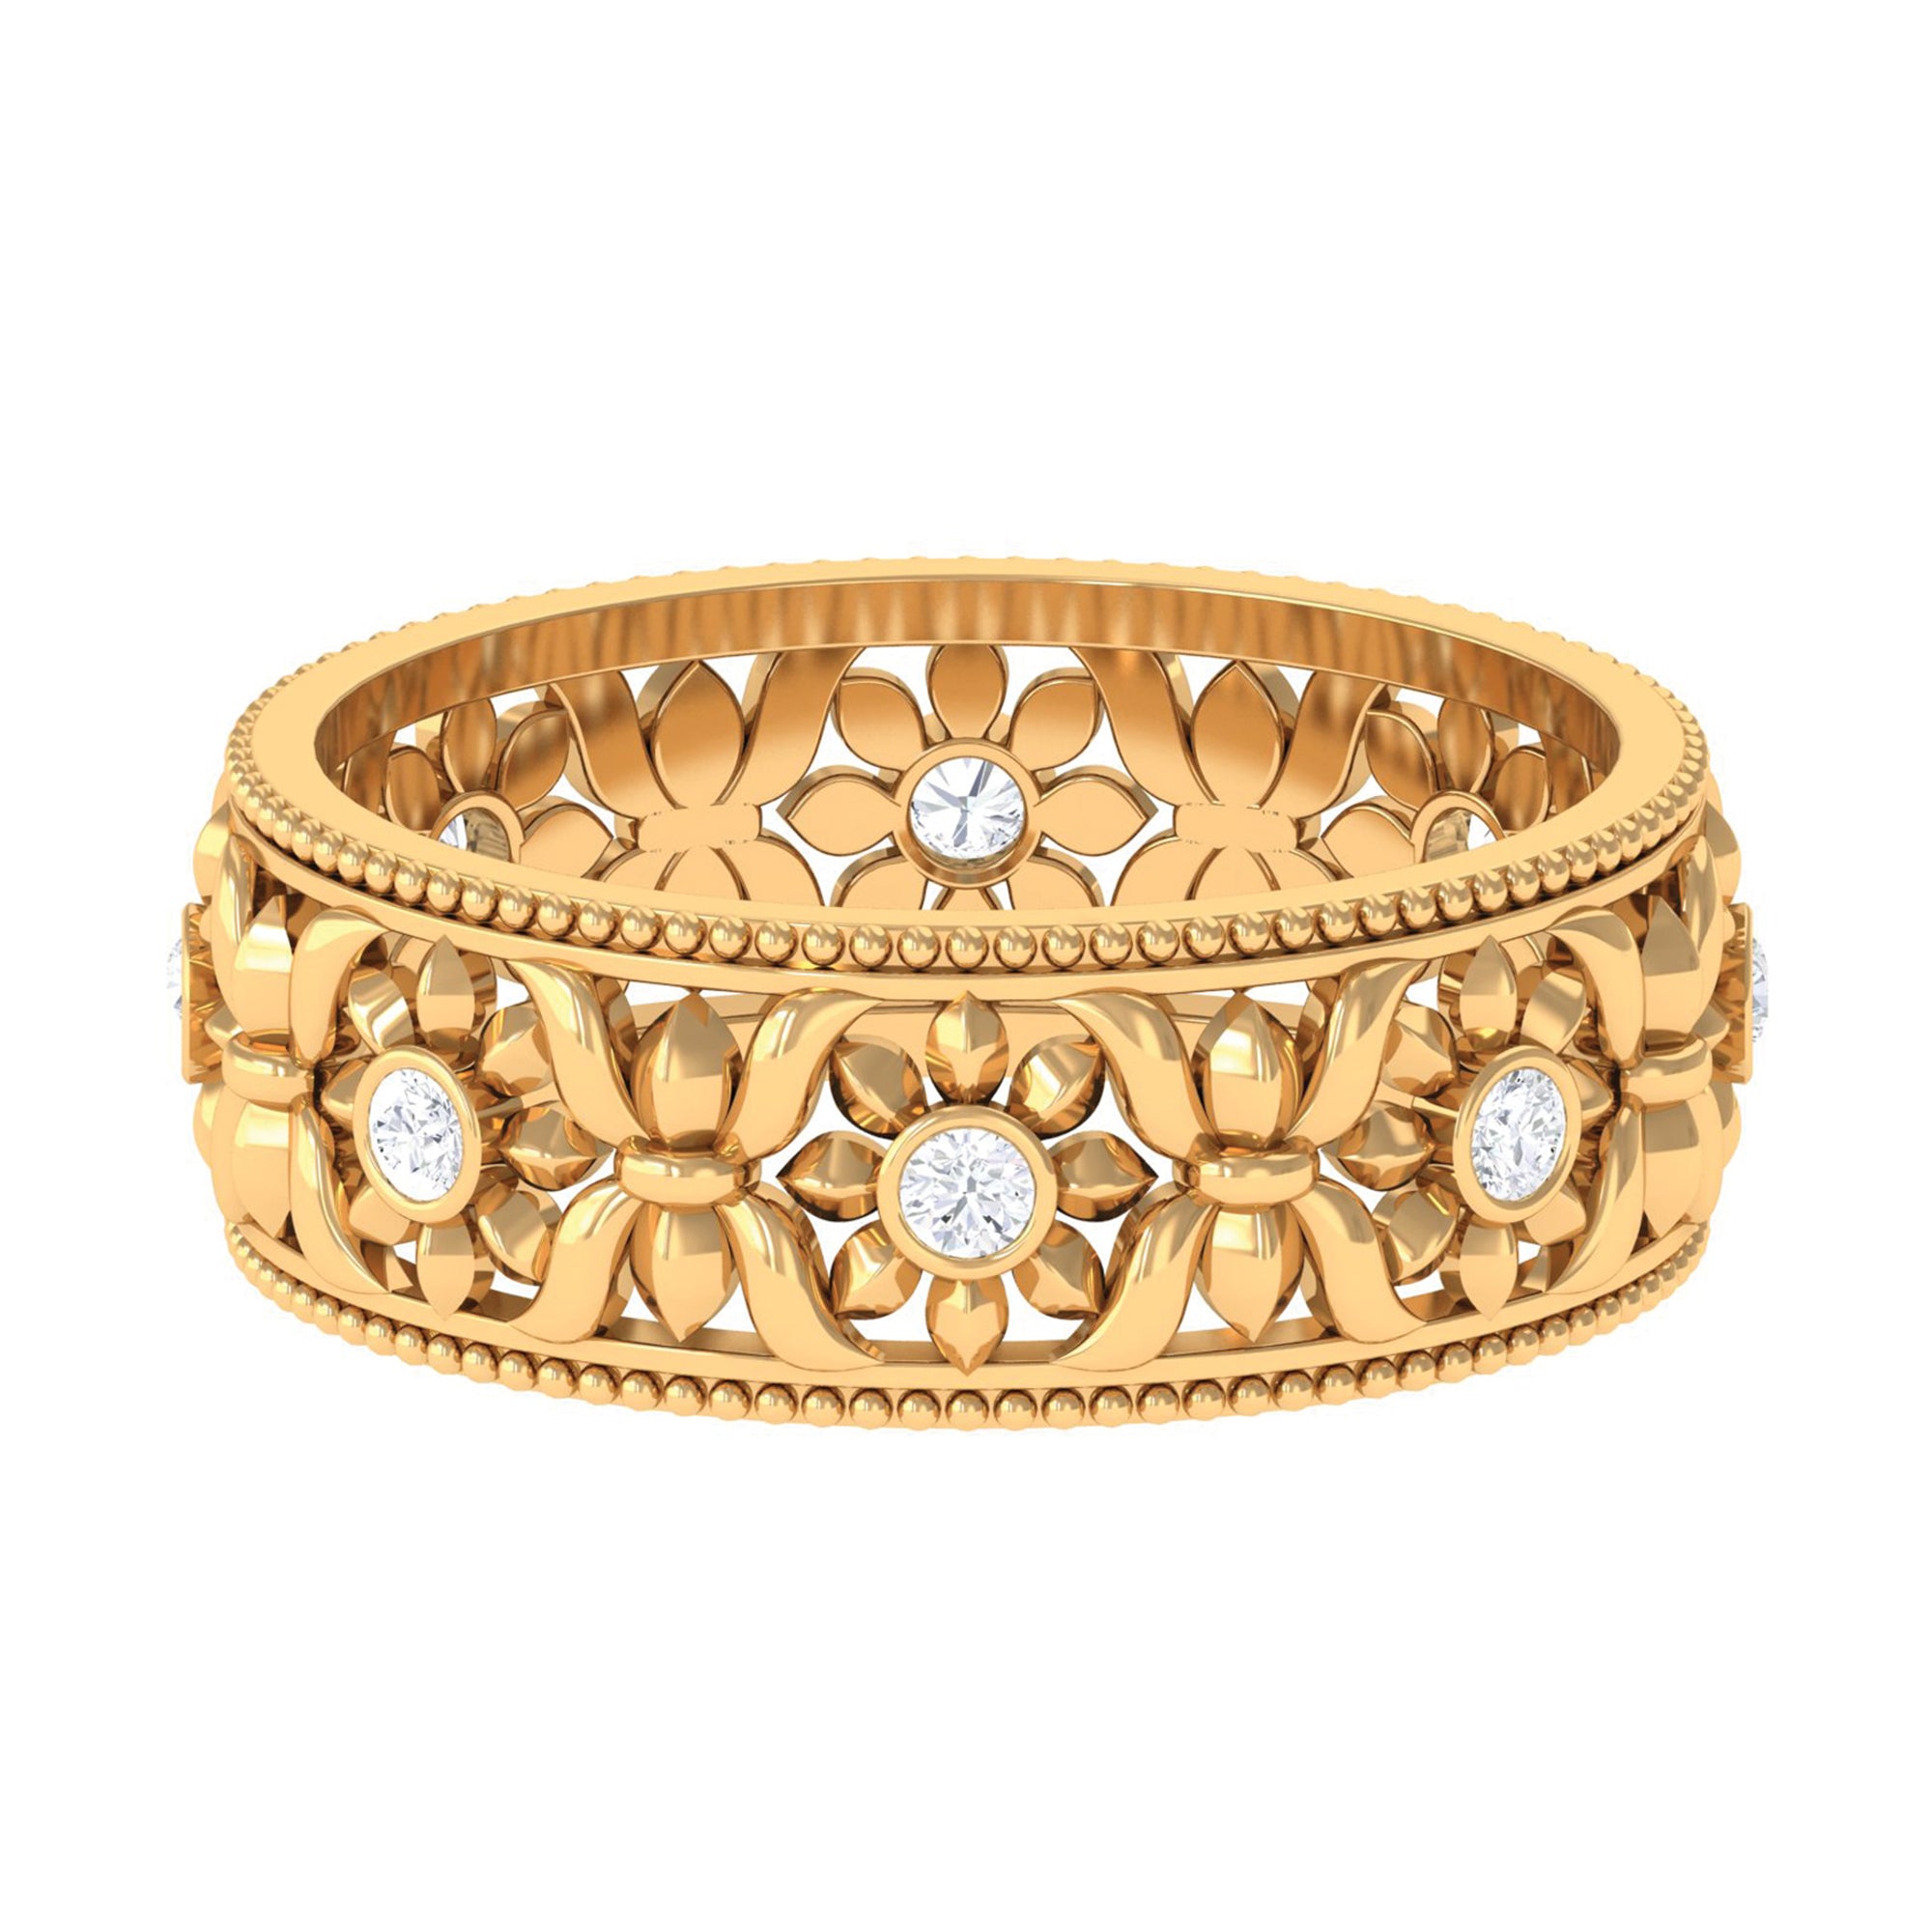 1/2 CT Bezel Set Diamond Floral Inspired Gold Filigree Band Ring Diamond - ( HI-SI ) - Color and Clarity - Rosec Jewels